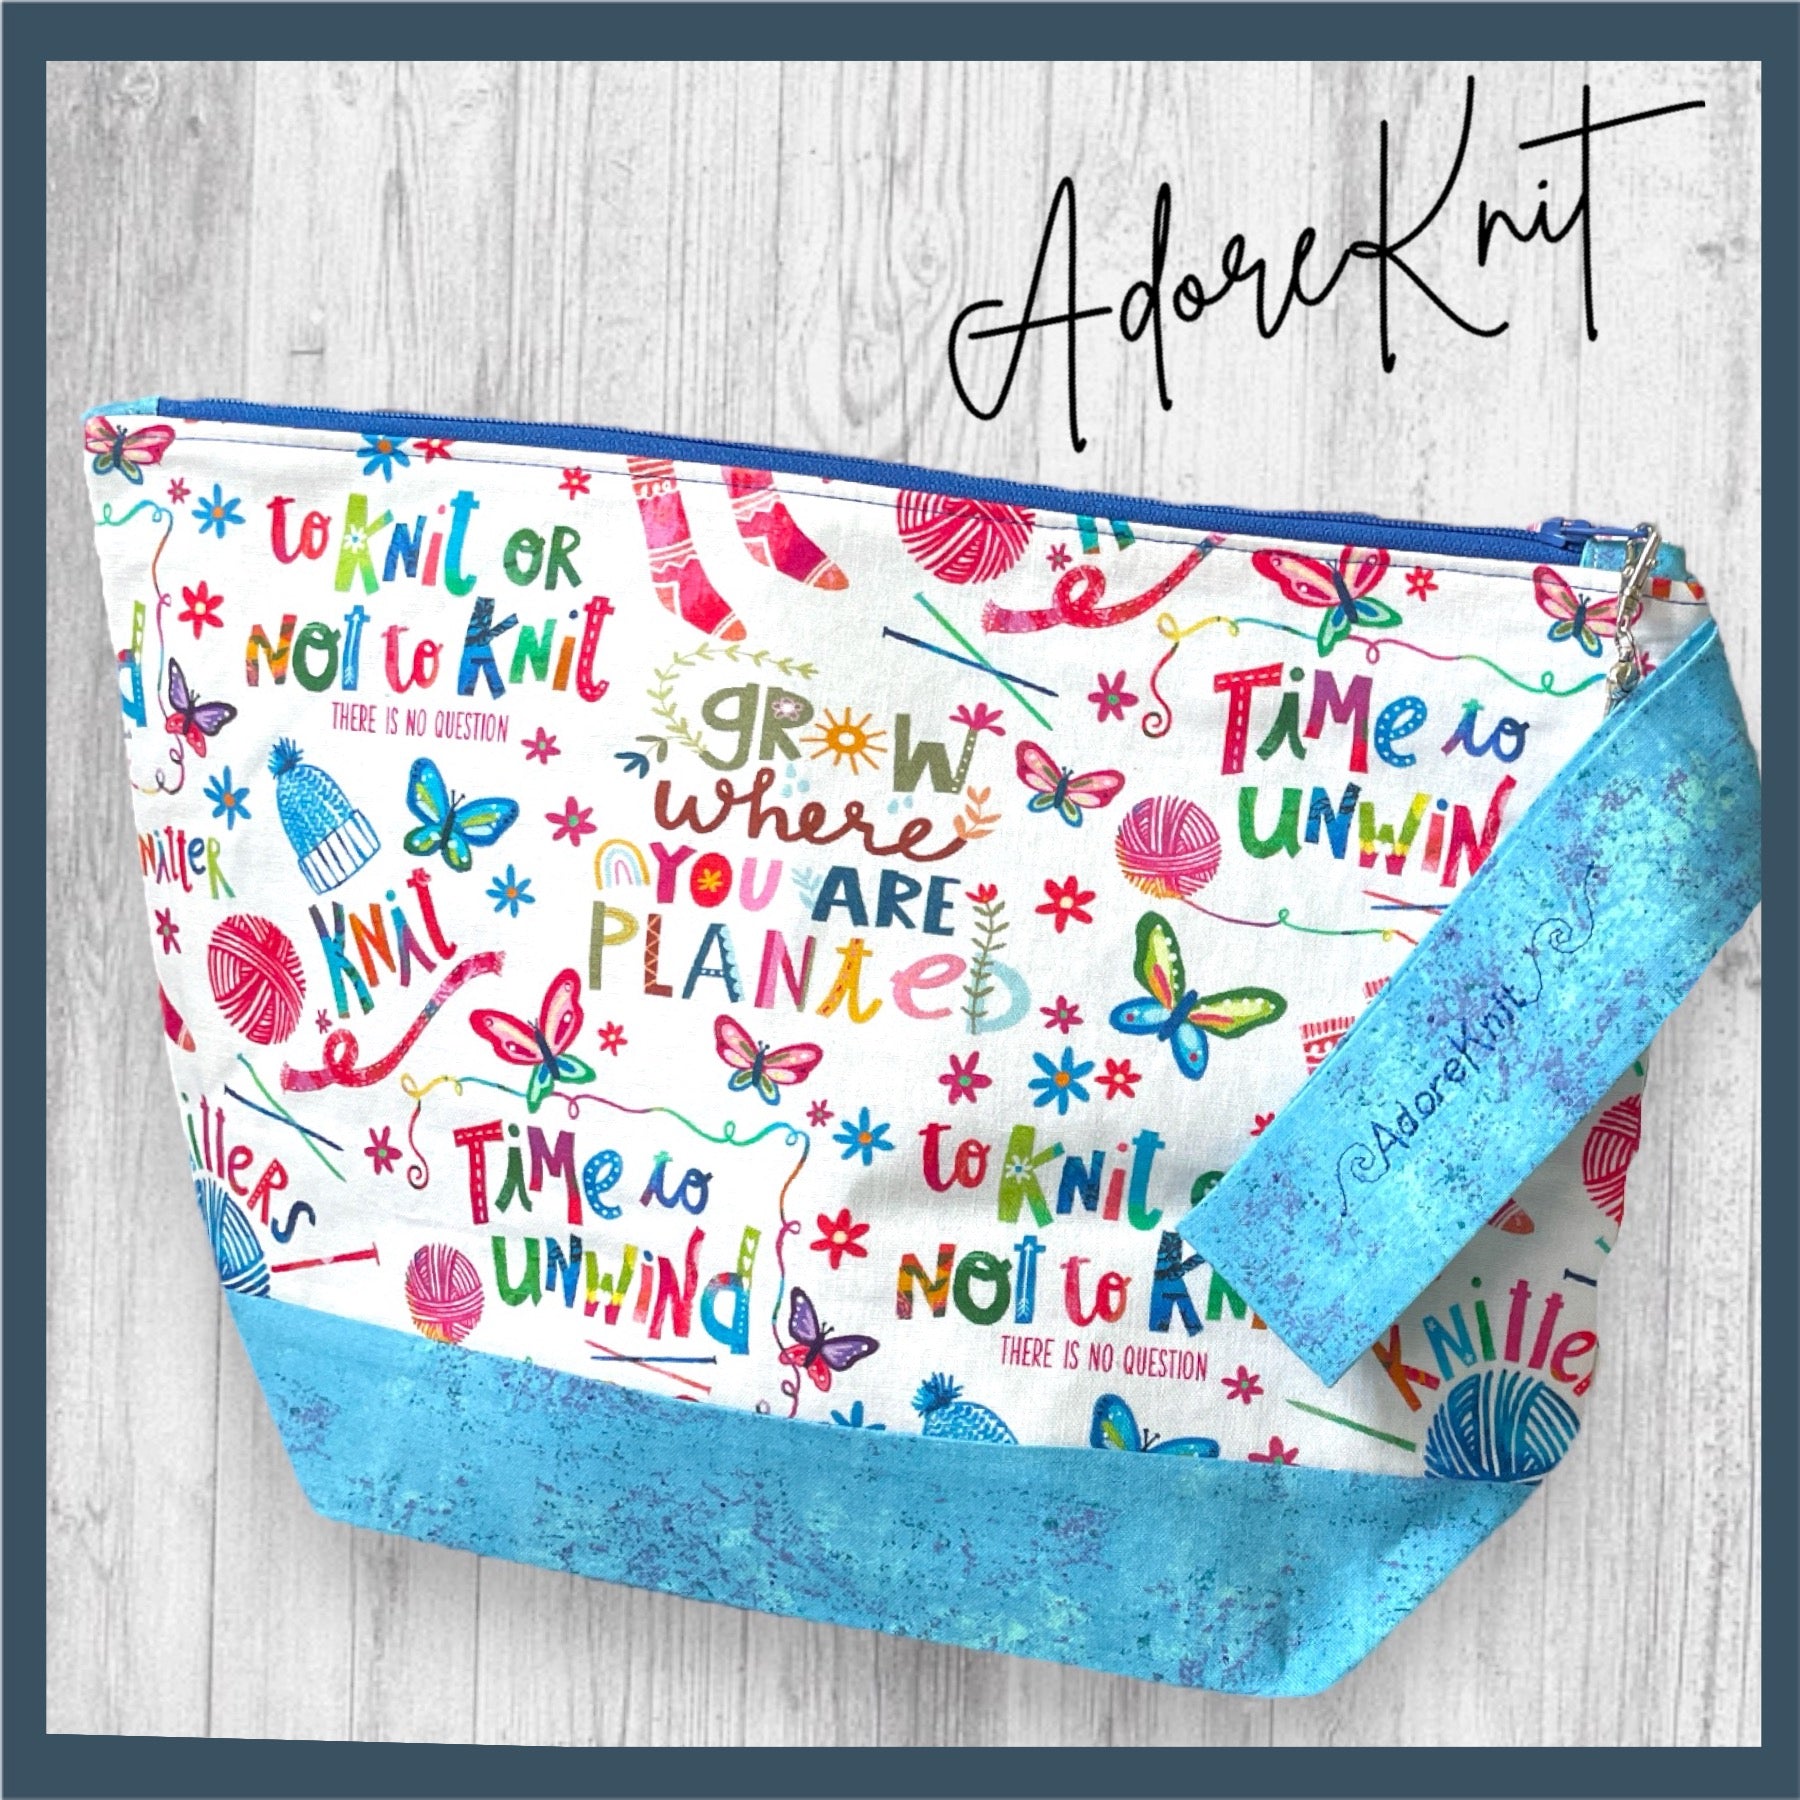 To Knit or Not To Knit Project Bag - AdoreKnit